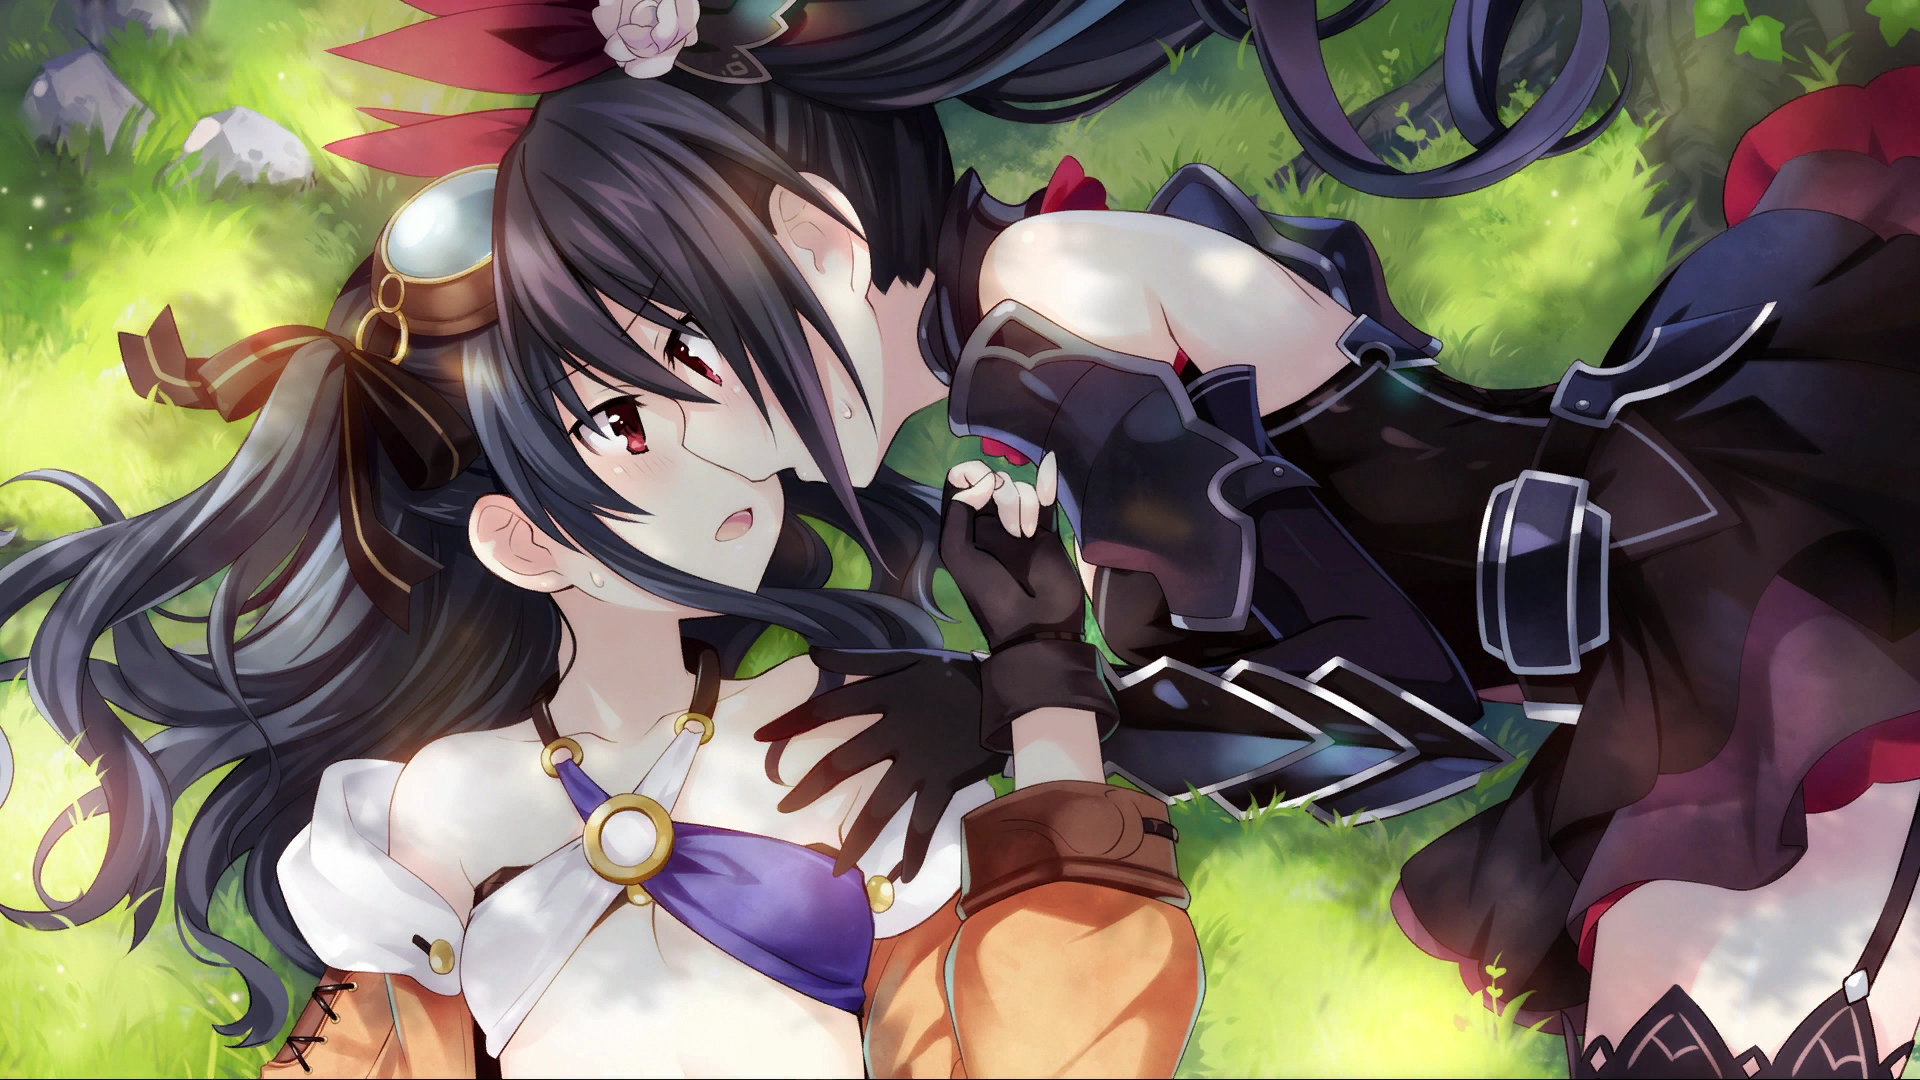 Noire and uni four goddesses online cyber dimension neptune and neptune series drawn by tsunako aa8646a78f4d237a2a8f3d5d0ff13a1e